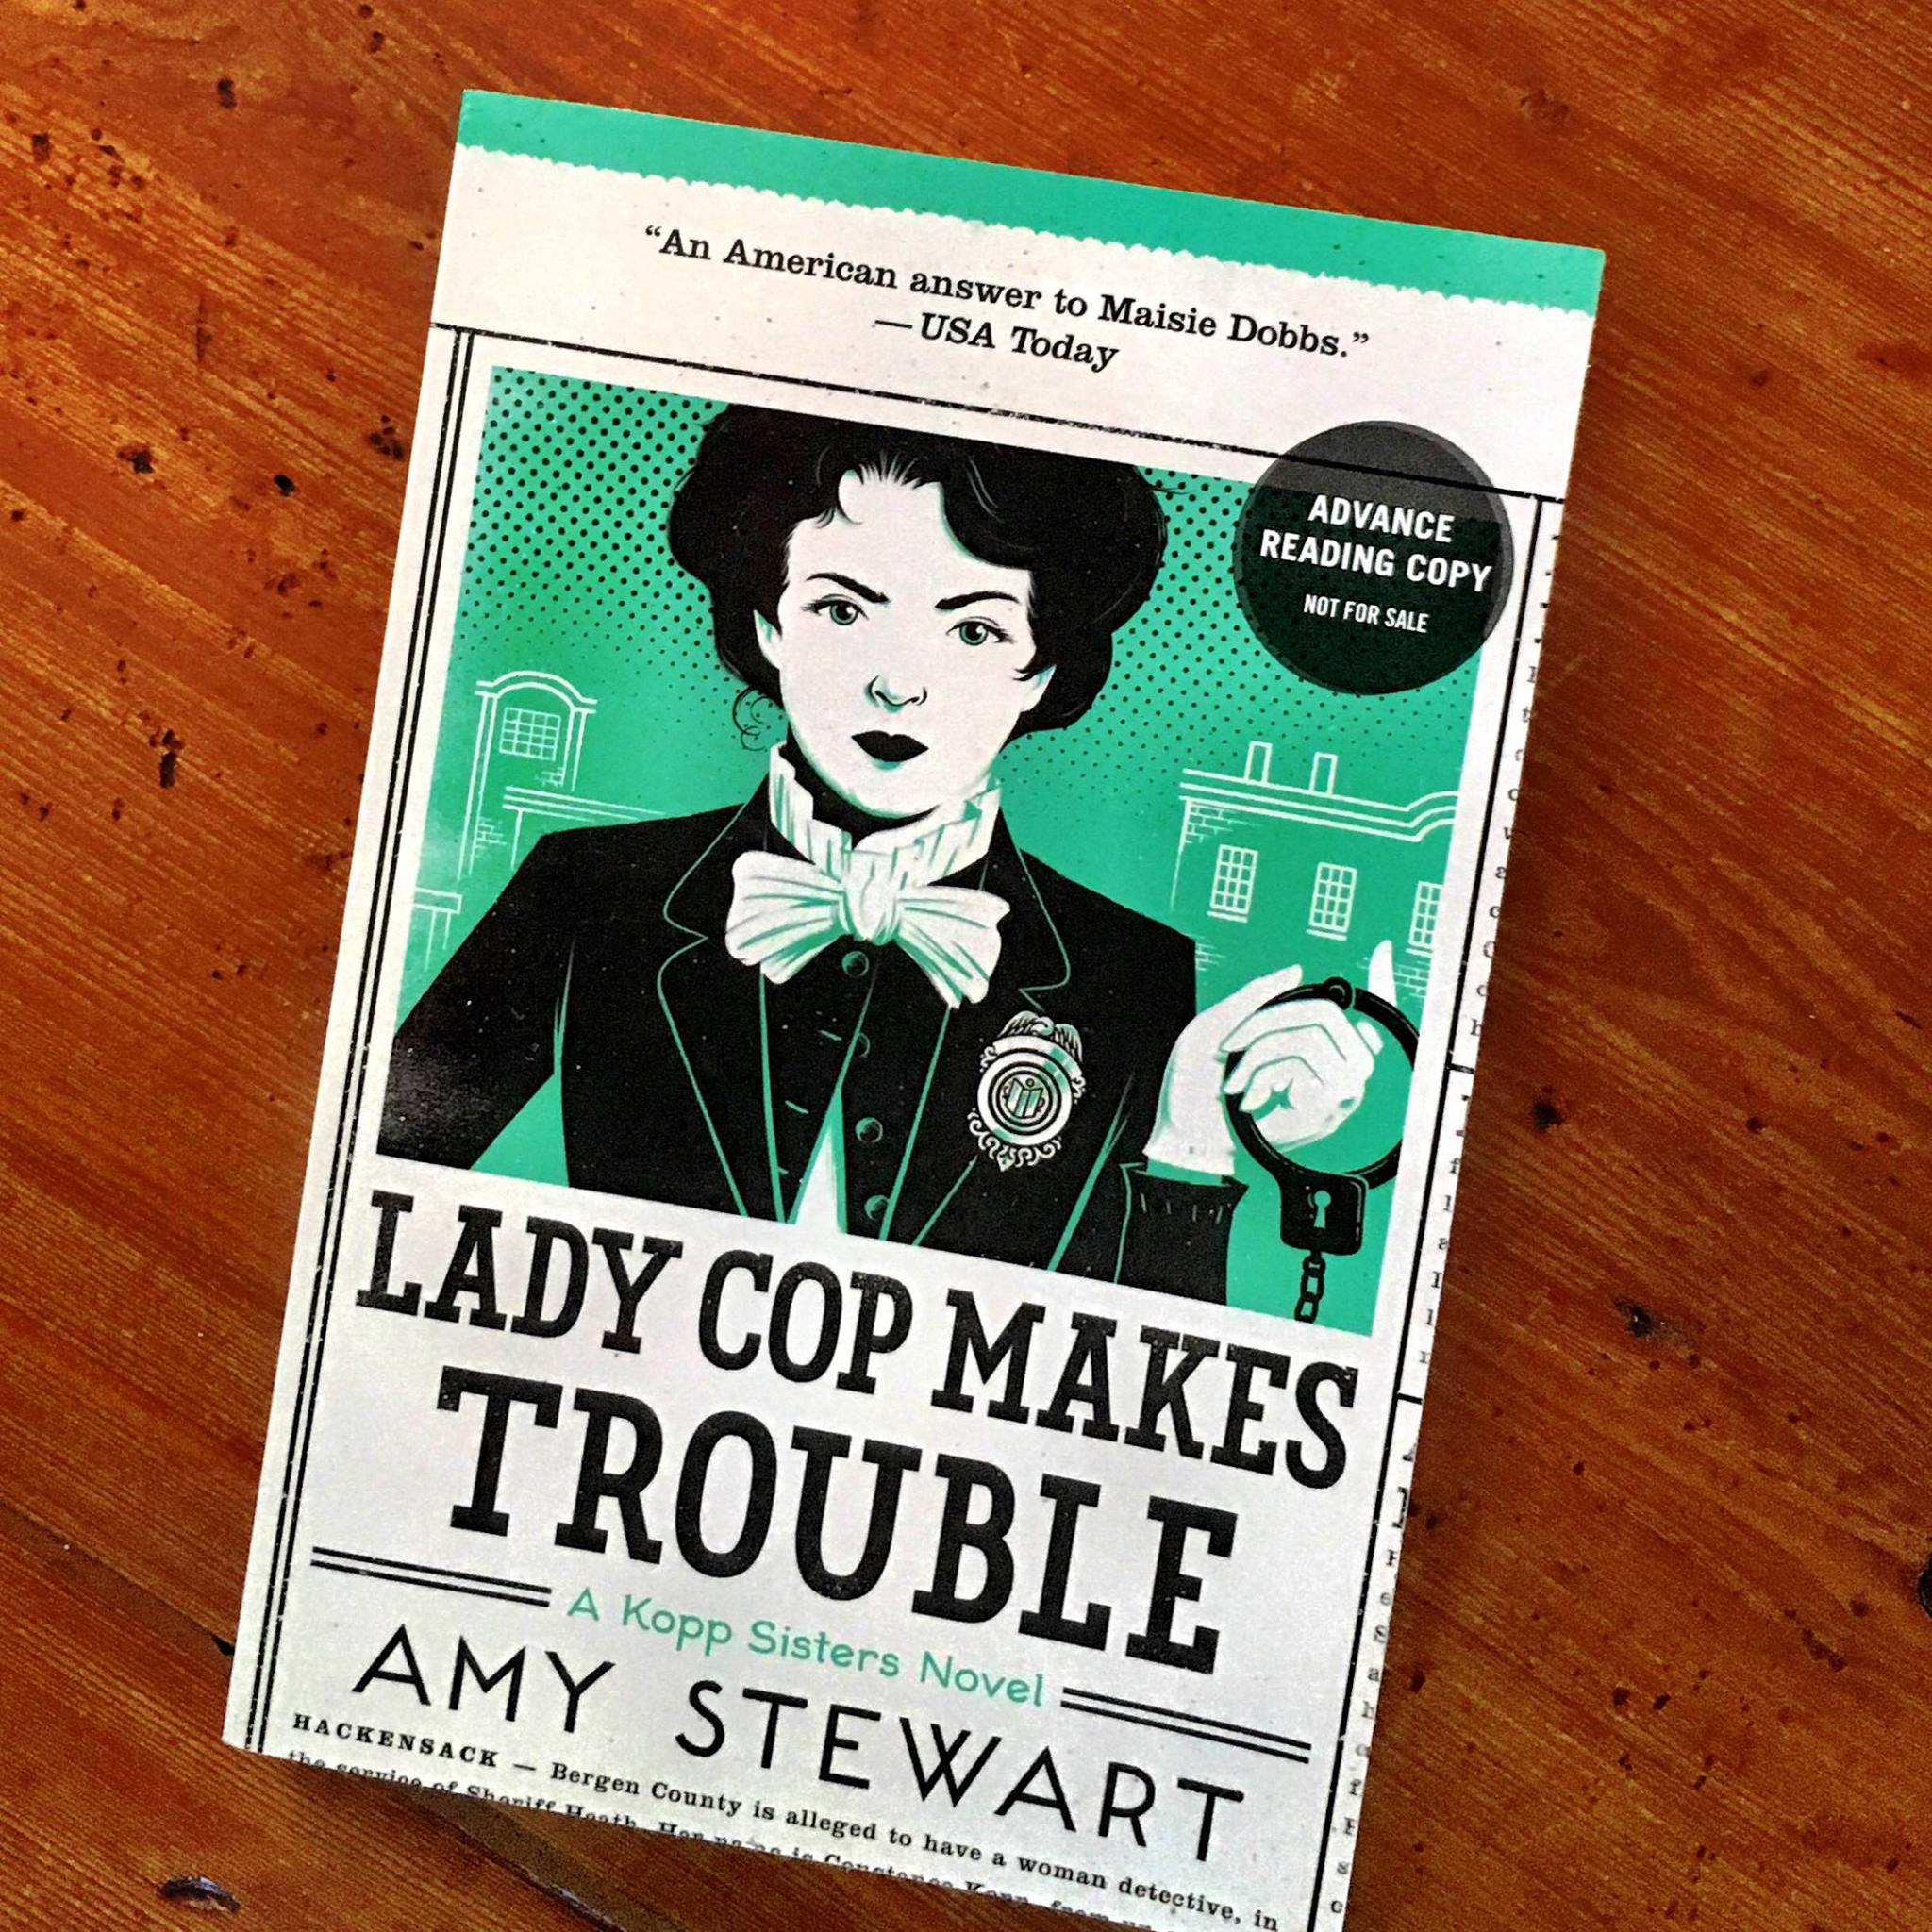 Amy Stewart presents her new book Lady Cop Makes Trouble